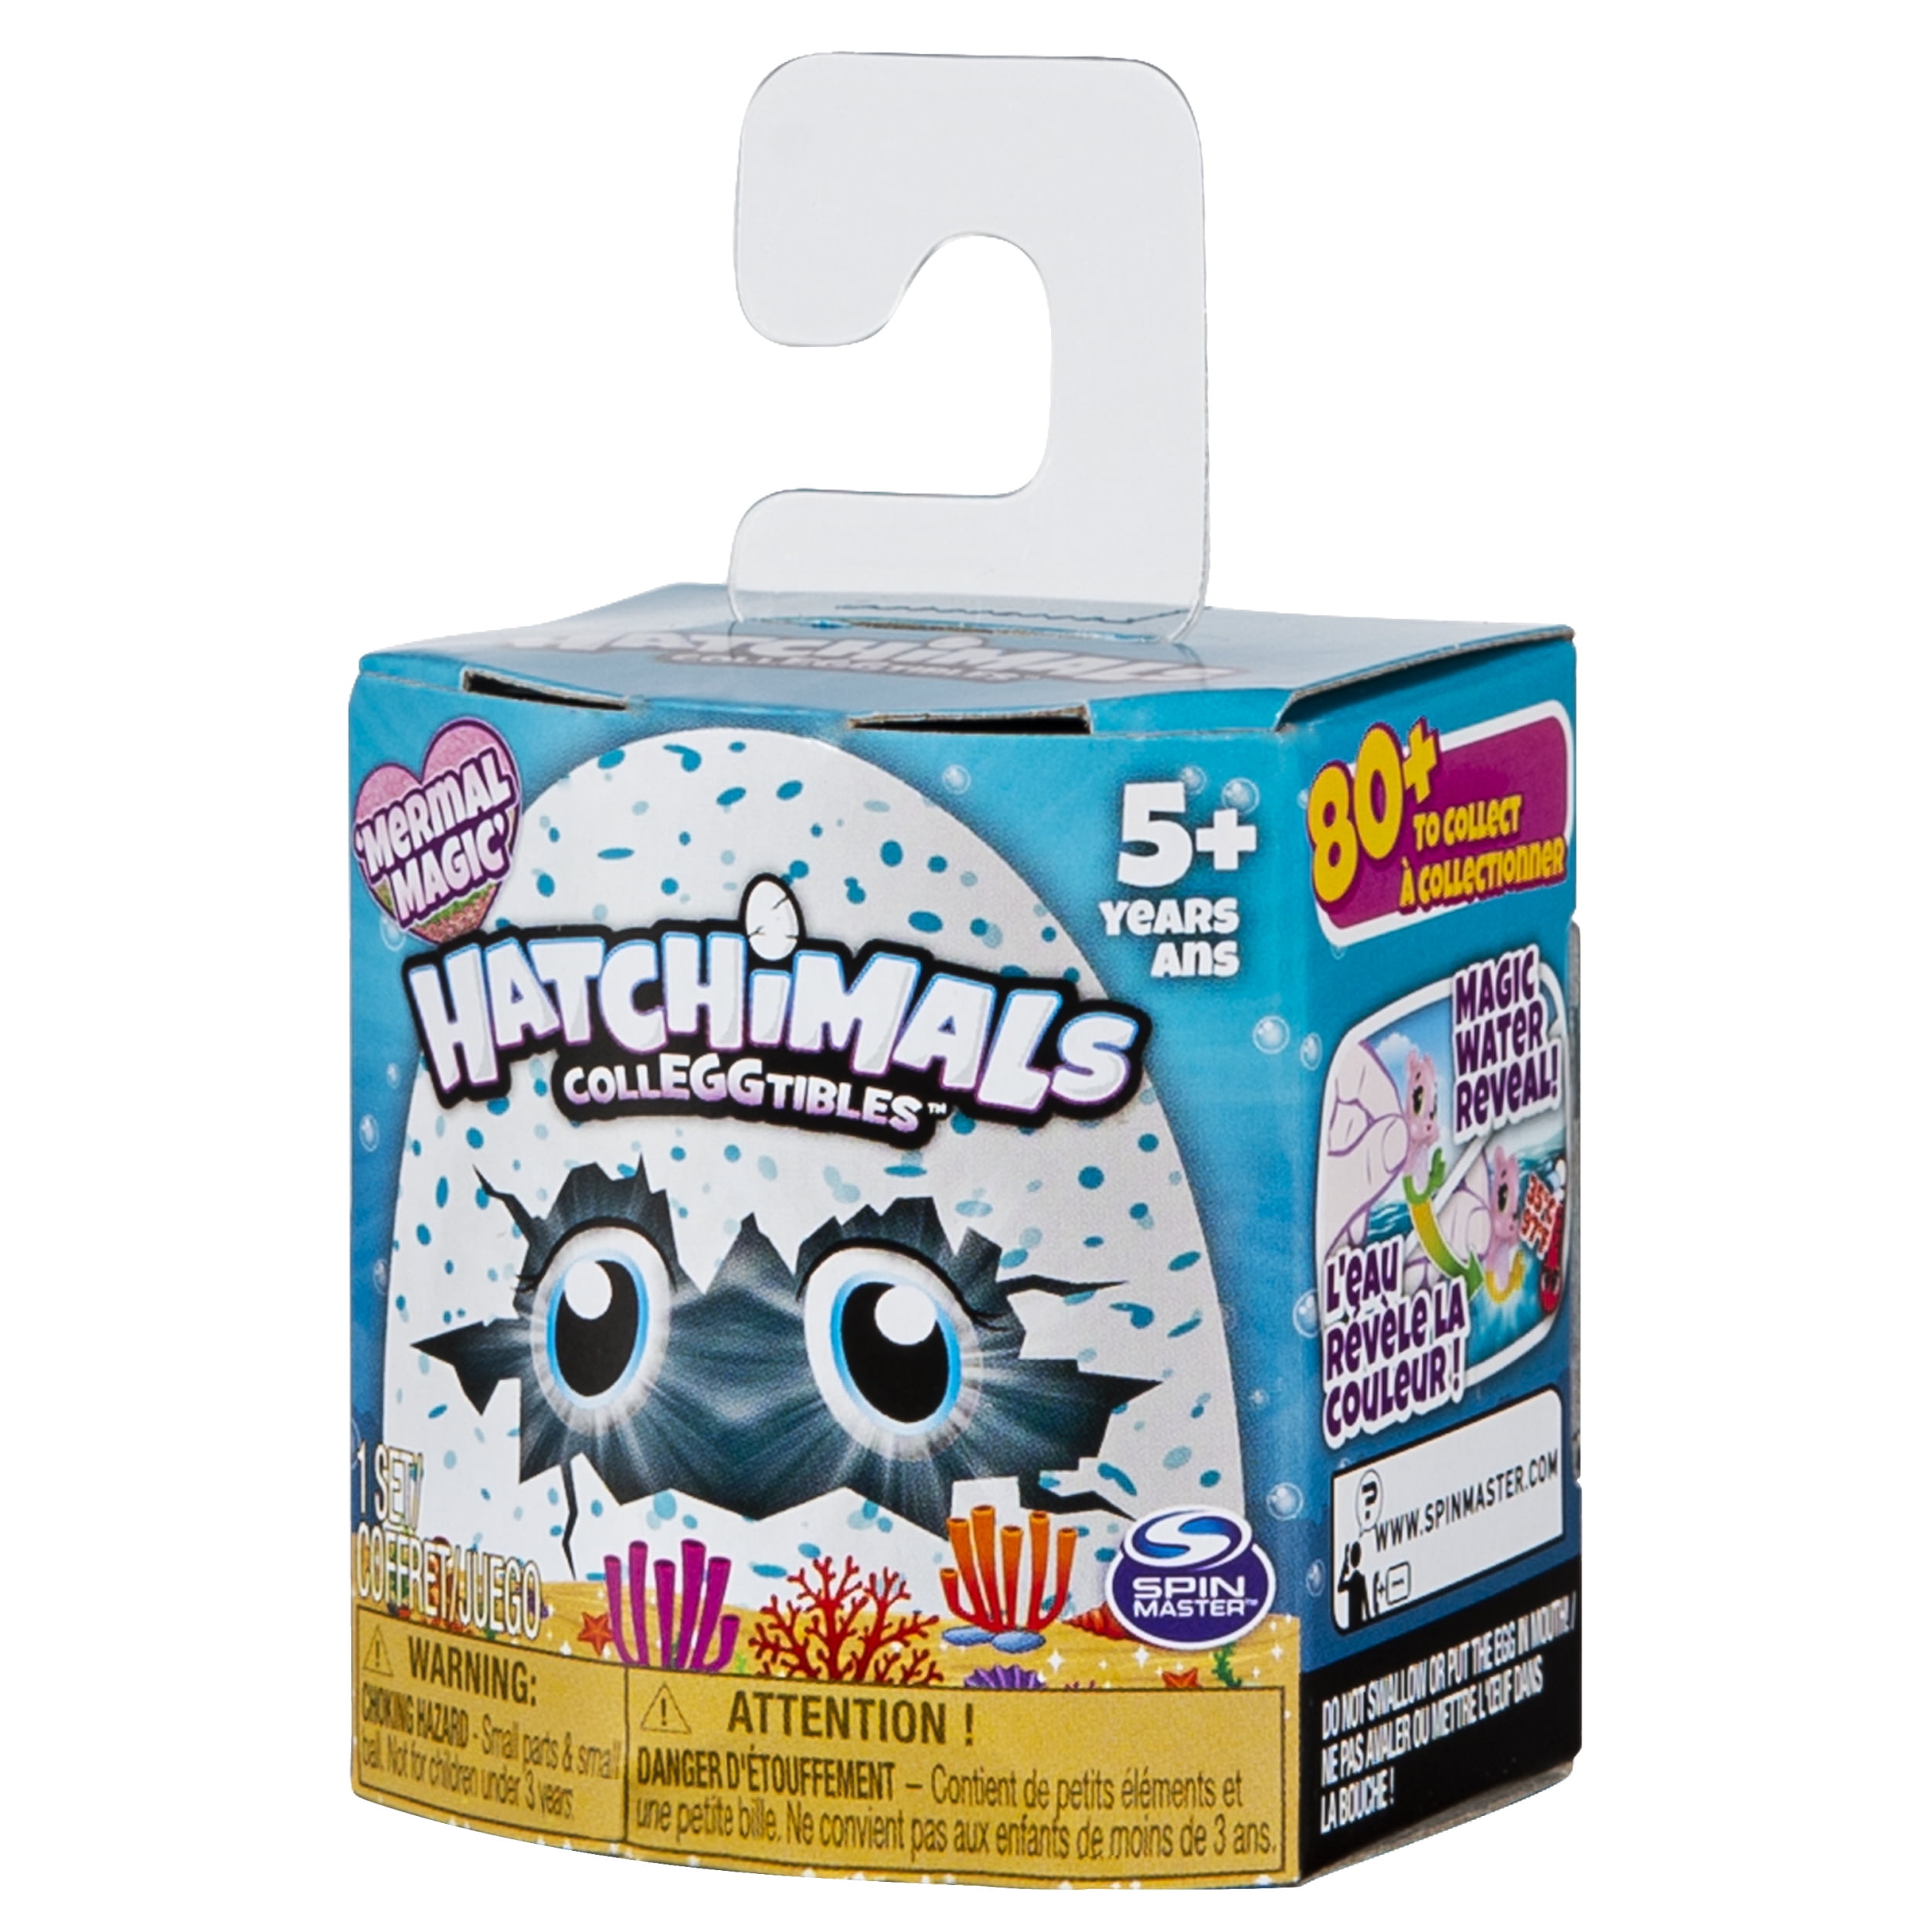 Hatchimals Colleggtibles Mermal Magic 6pk Shell Carrying Case With Season 5 for sale online 